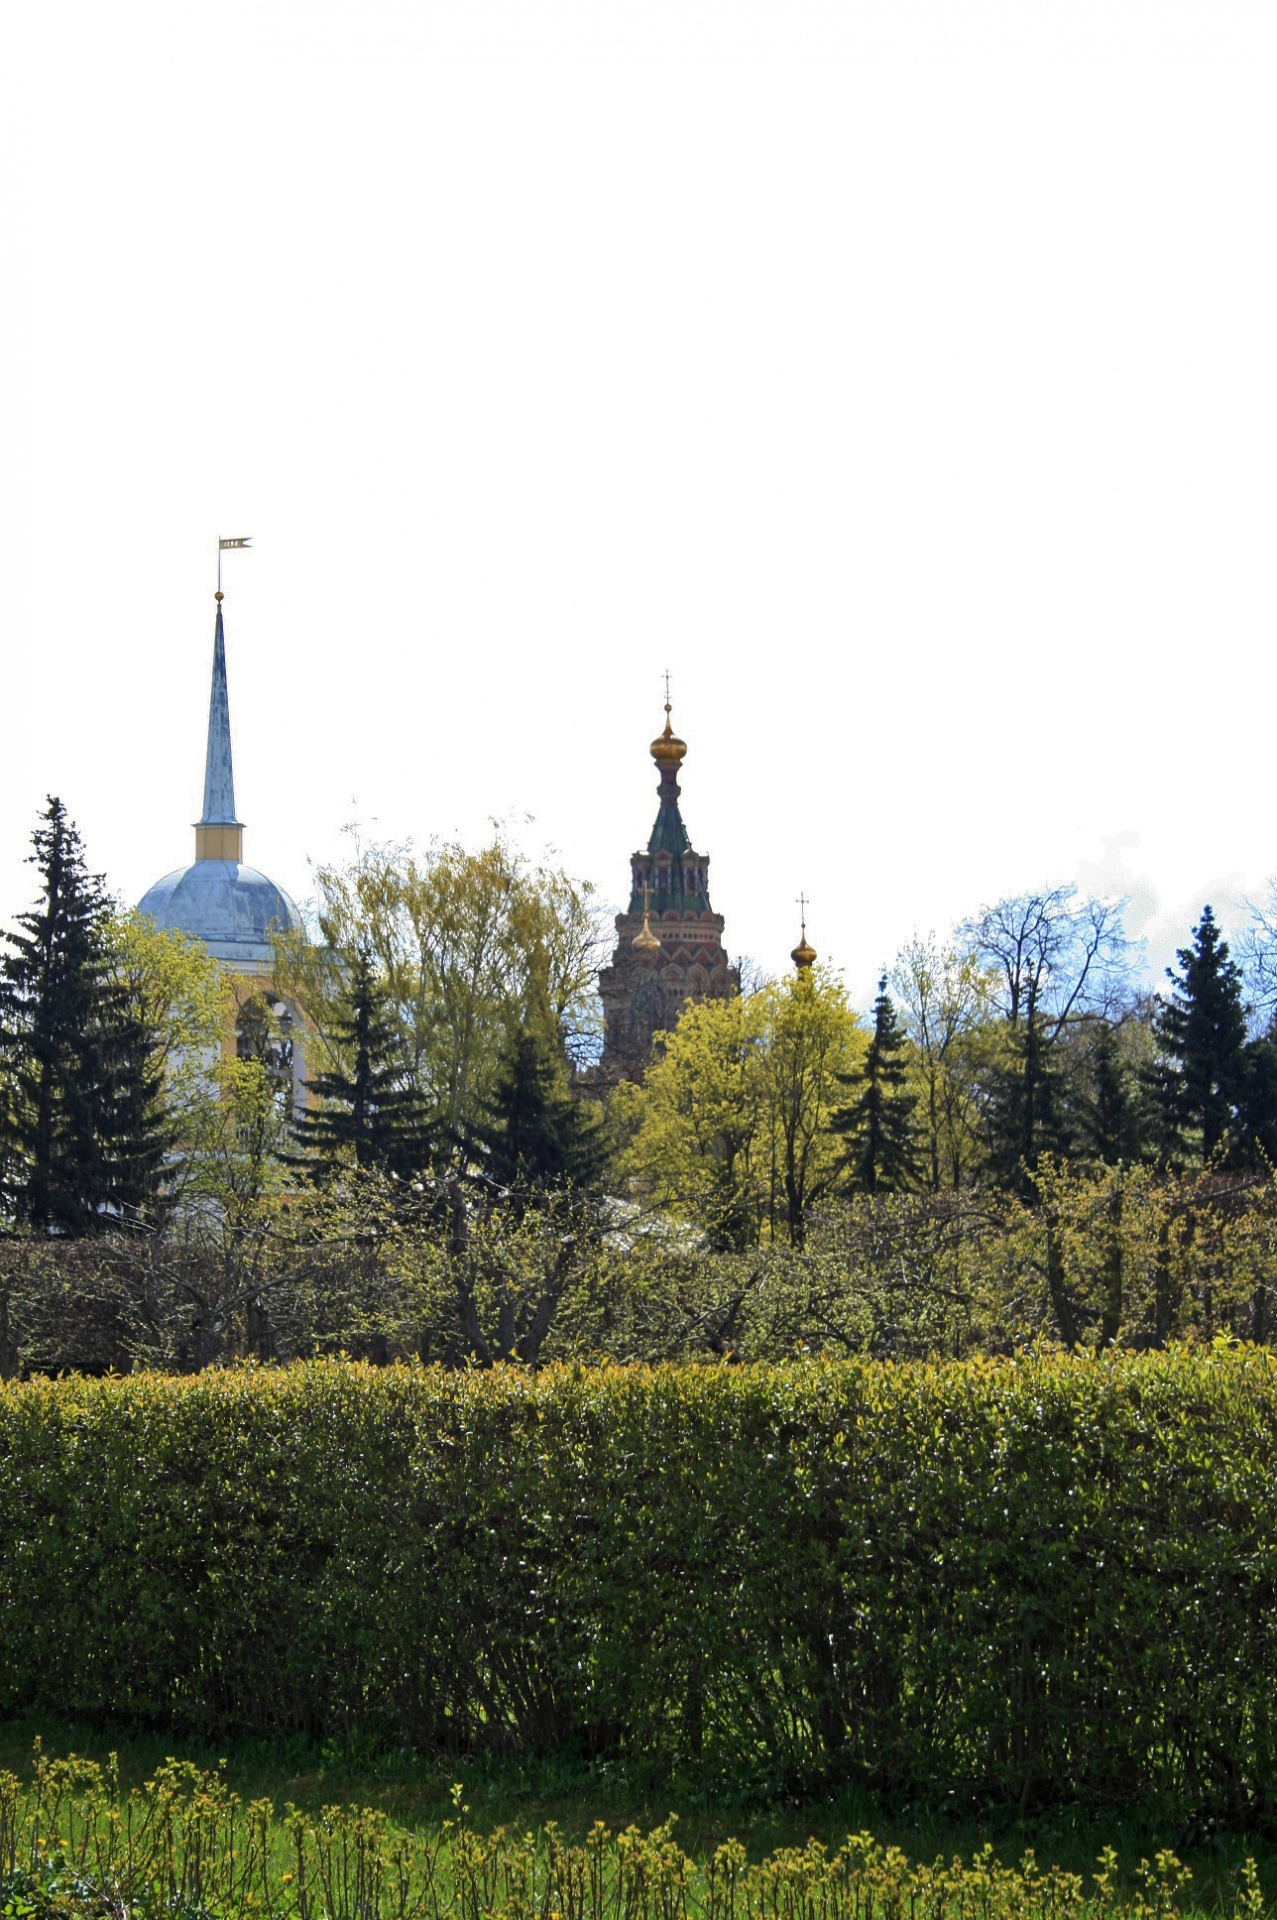 domes and spires of historic buildings behind trees and a hedge in saint petersburg, russia